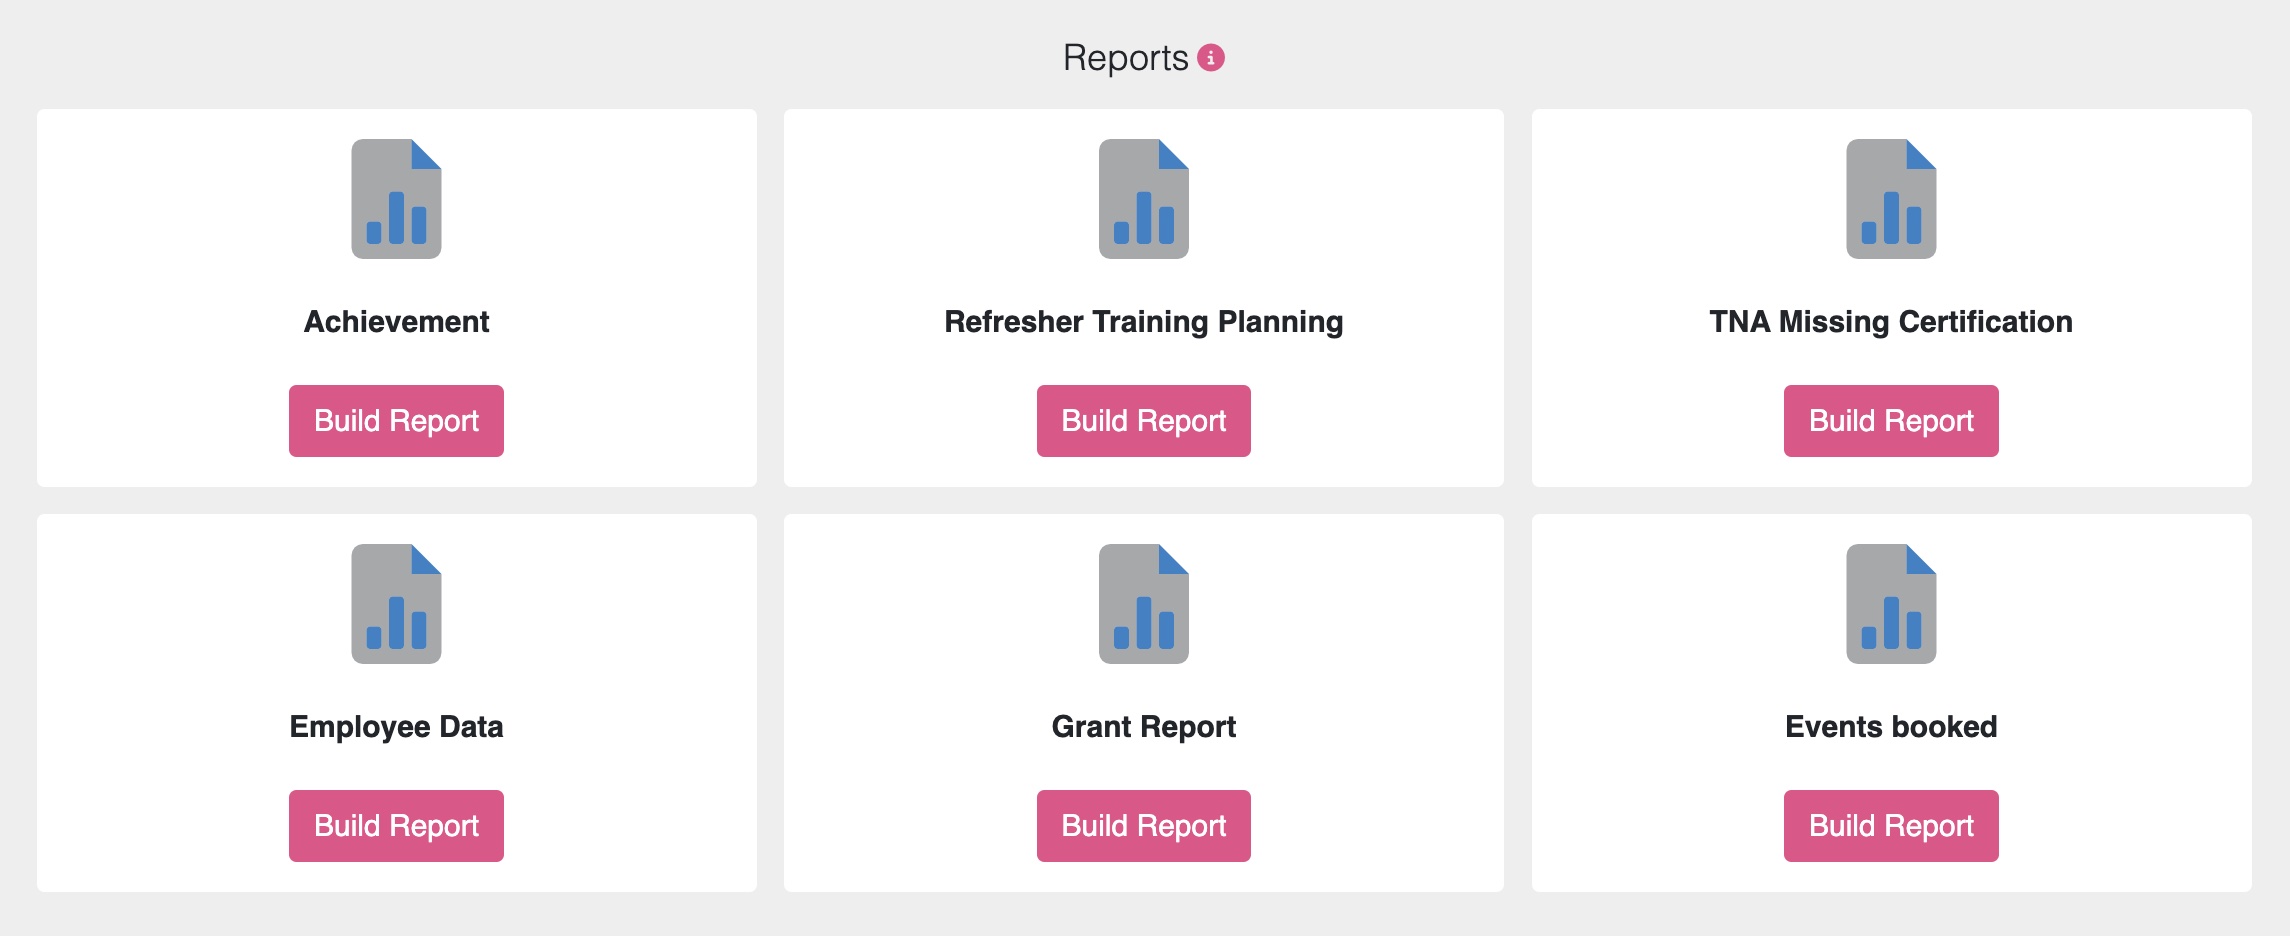 Screenshot showing default reports than can be run such as achievement report, refresher training planning report, TNA missing certification report, employee data report, grant report and events booked report.